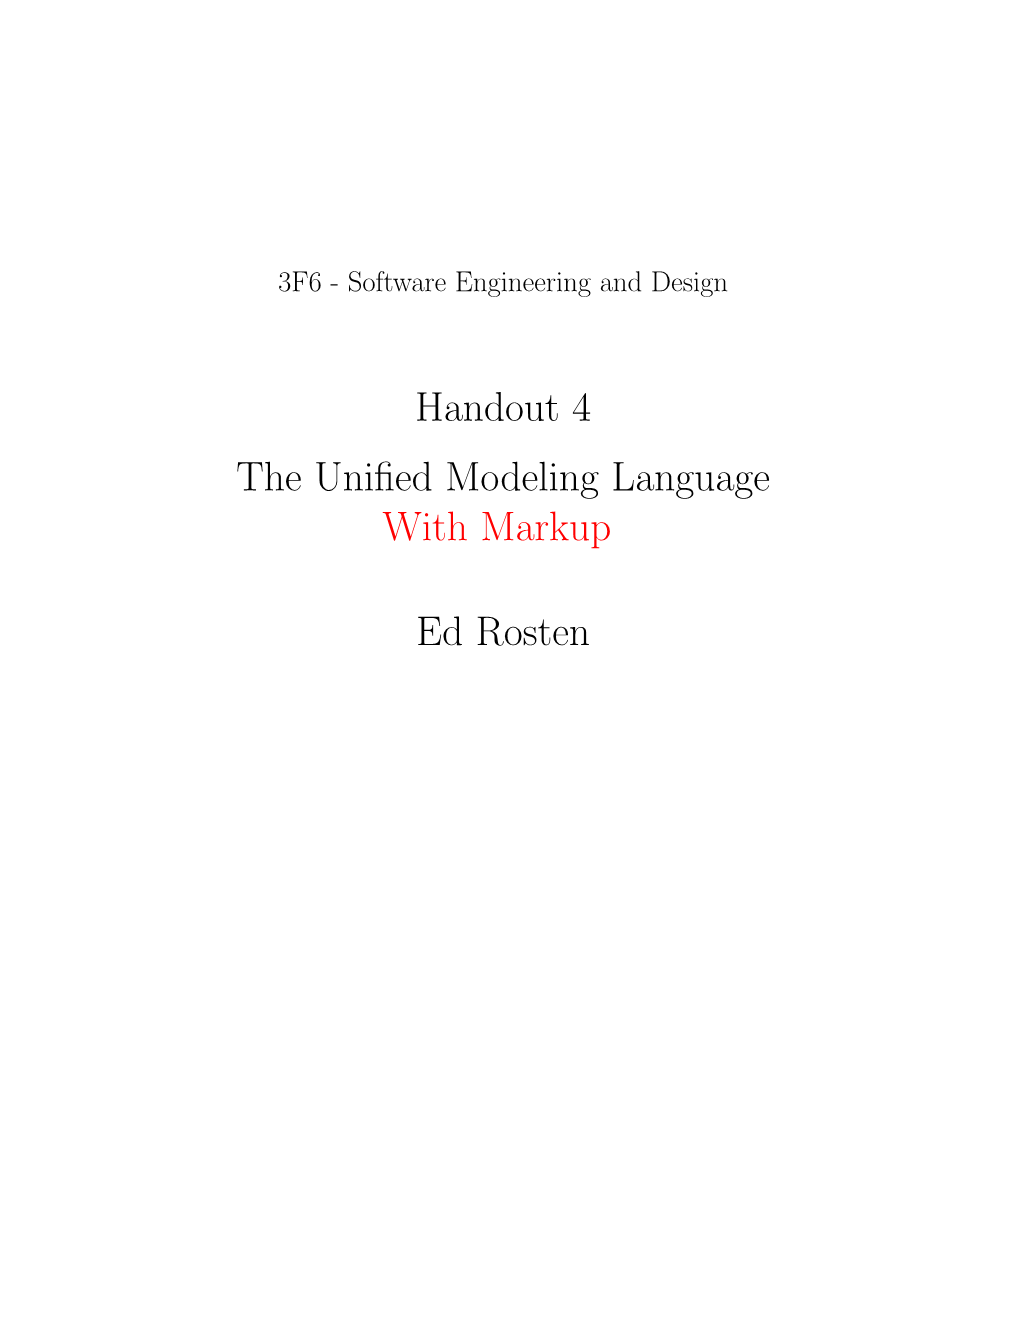 Handout 4 the Unified Modeling Language with Markup Ed Rosten